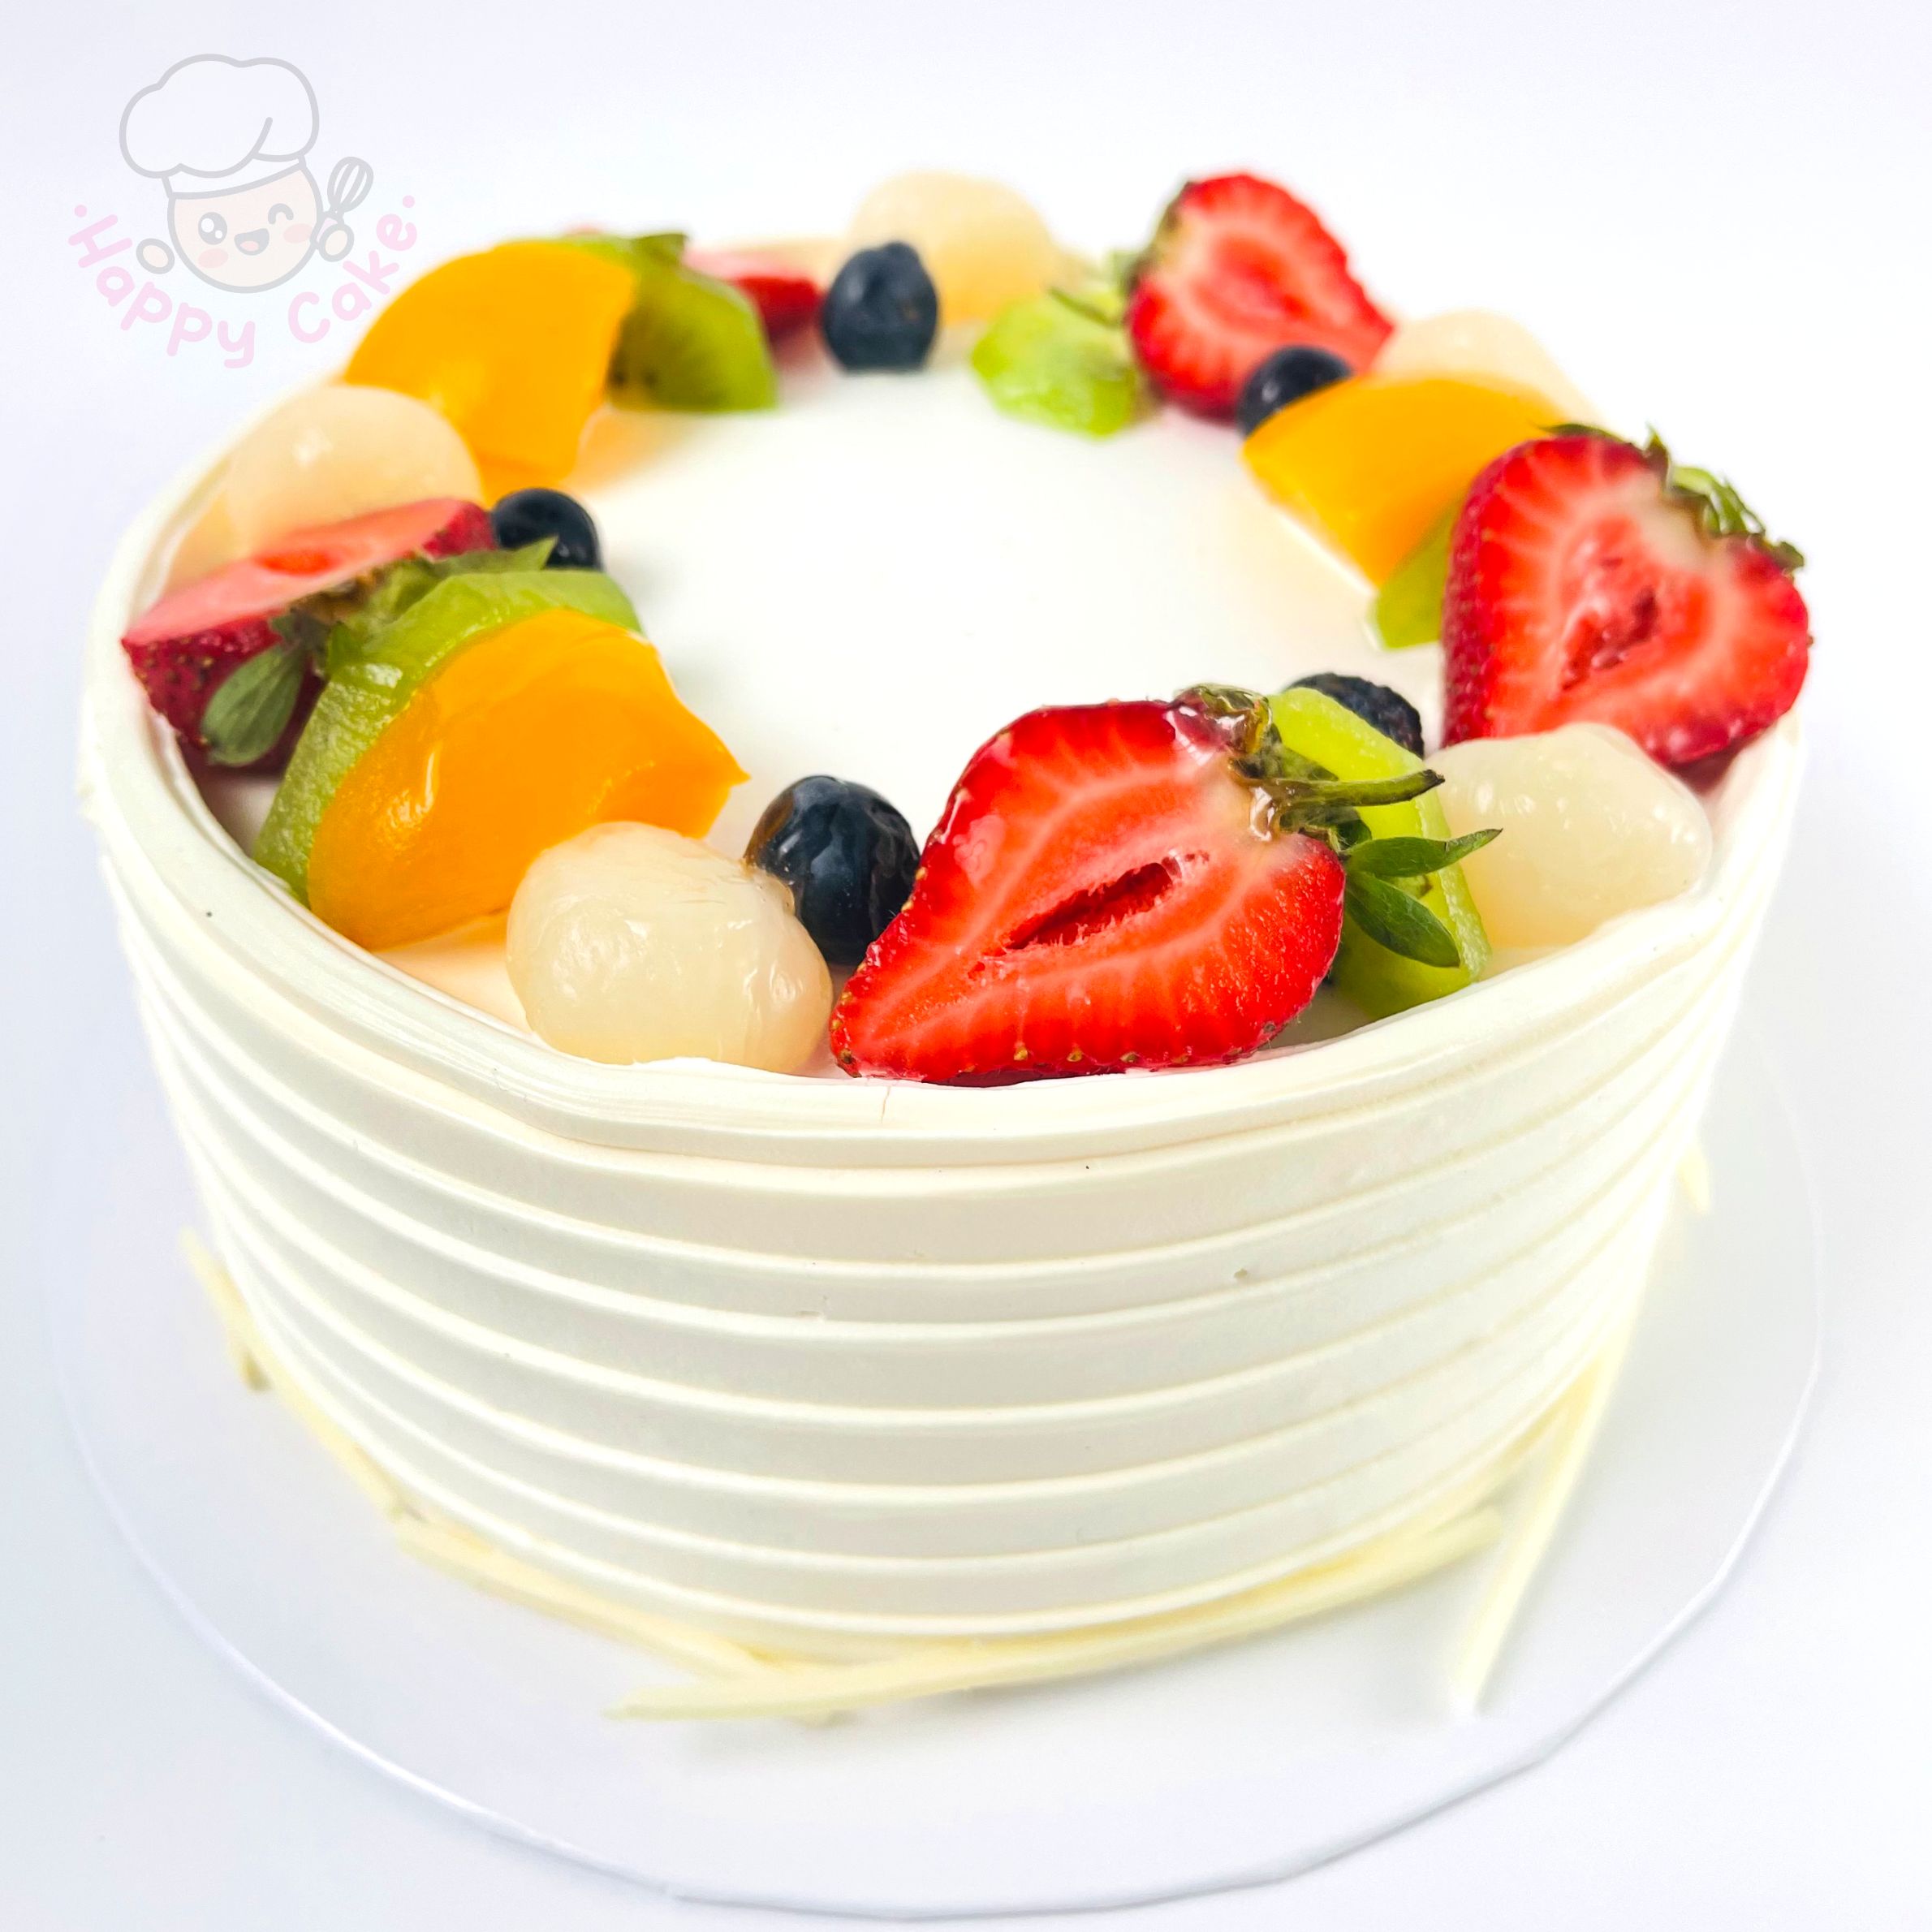 Top 10 Best Fruit Cake near Westminster, CA - August 2023 - Yelp